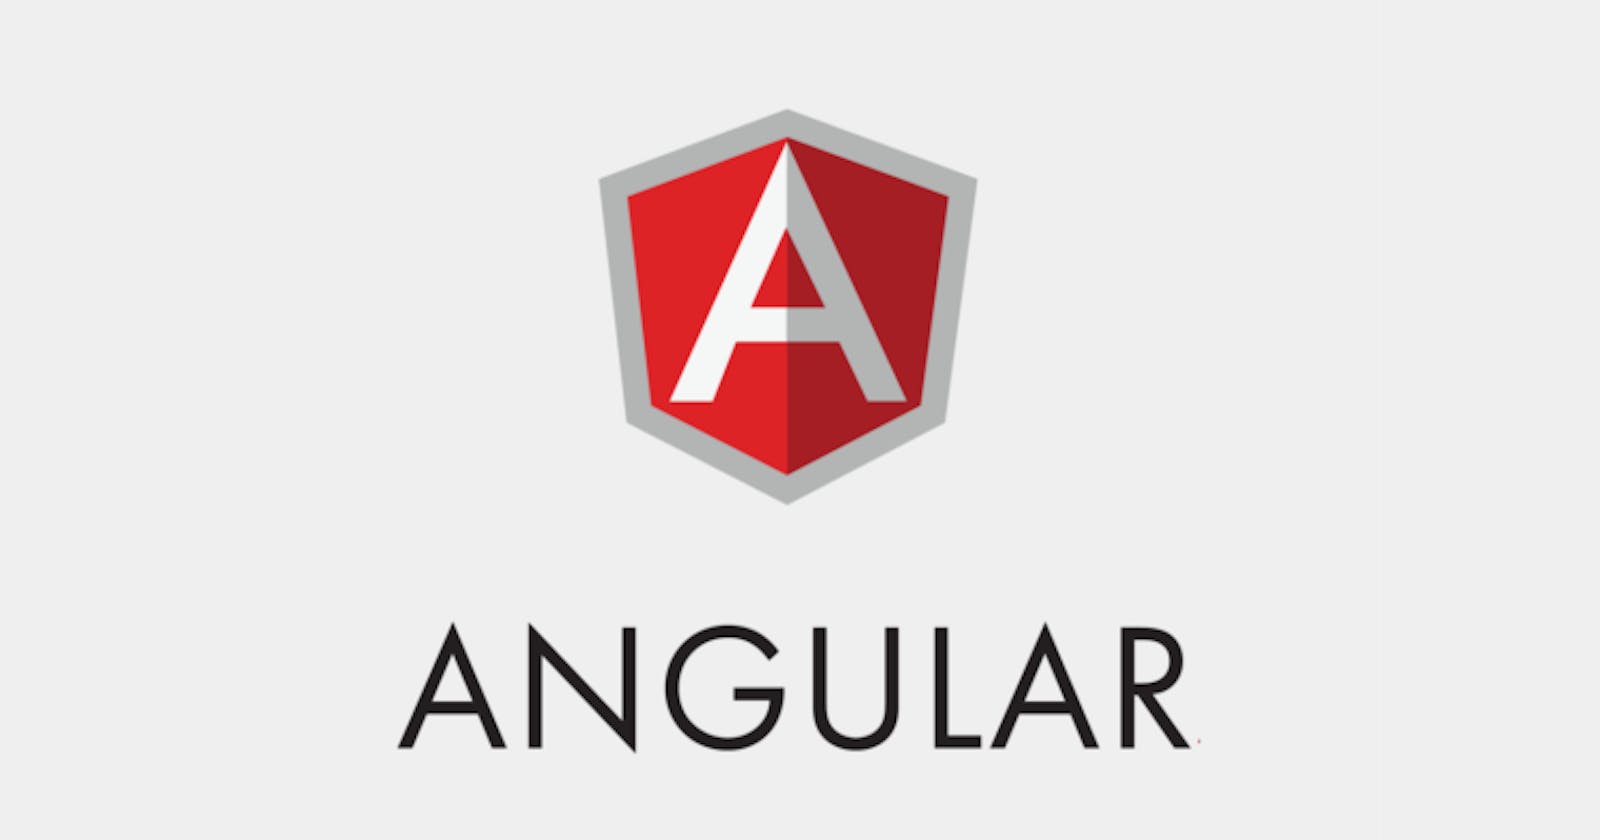 What are Observables in Angular?